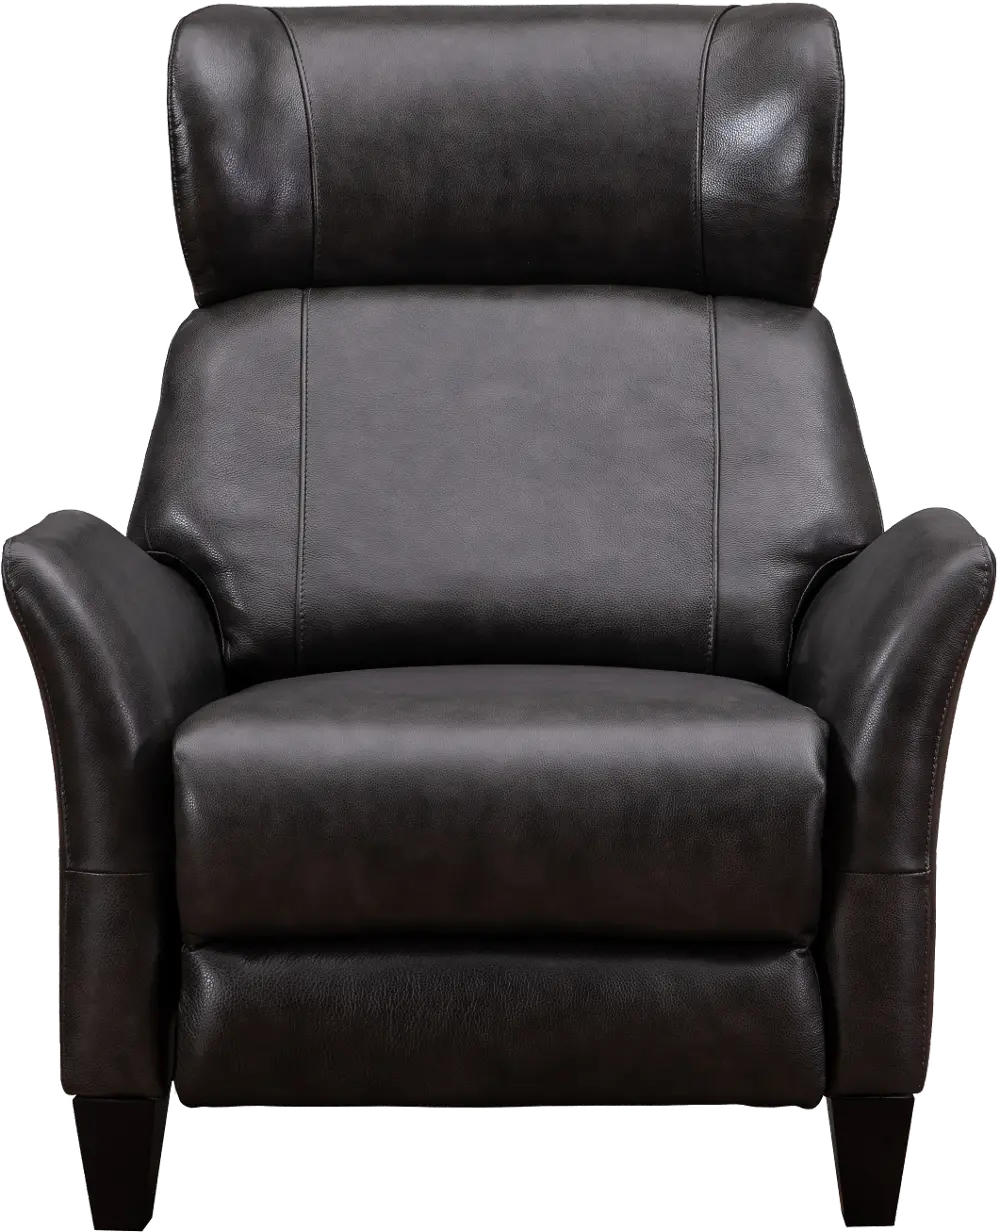 Steel Gray Leather-Match Push Back Recliner - Galaxy-1